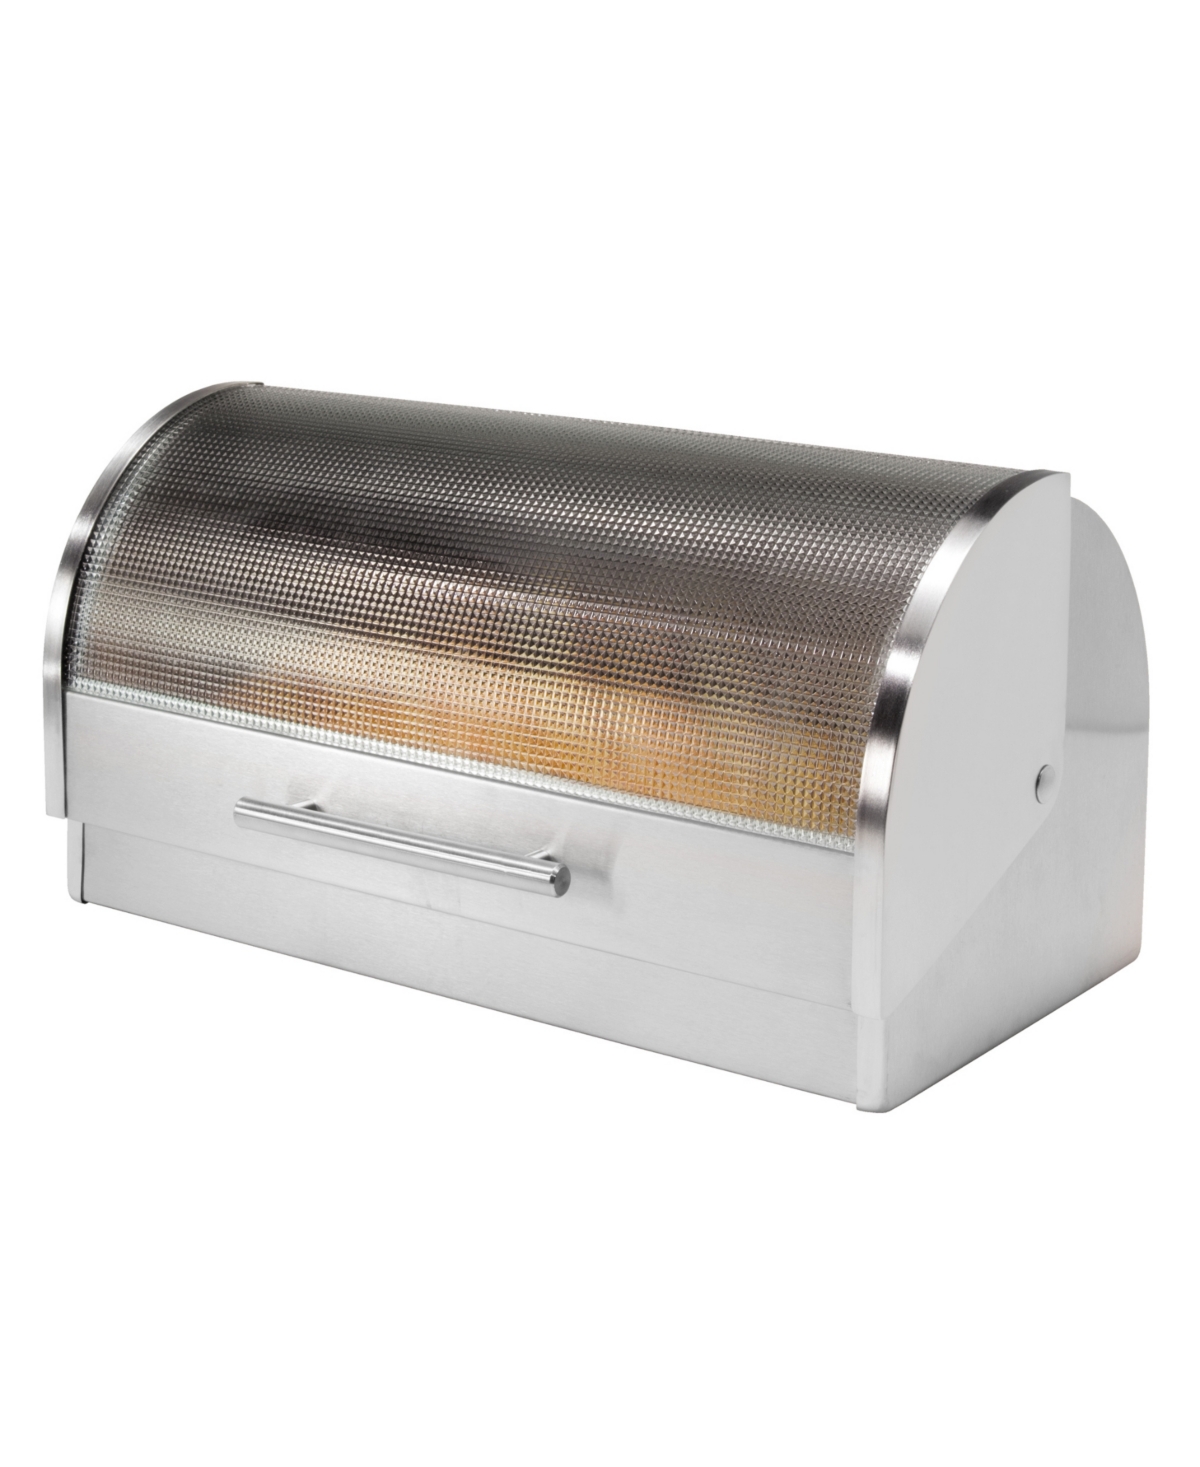 Oggi 8.5" Bread Box With Tempered Glass Lid In Stainless Steel